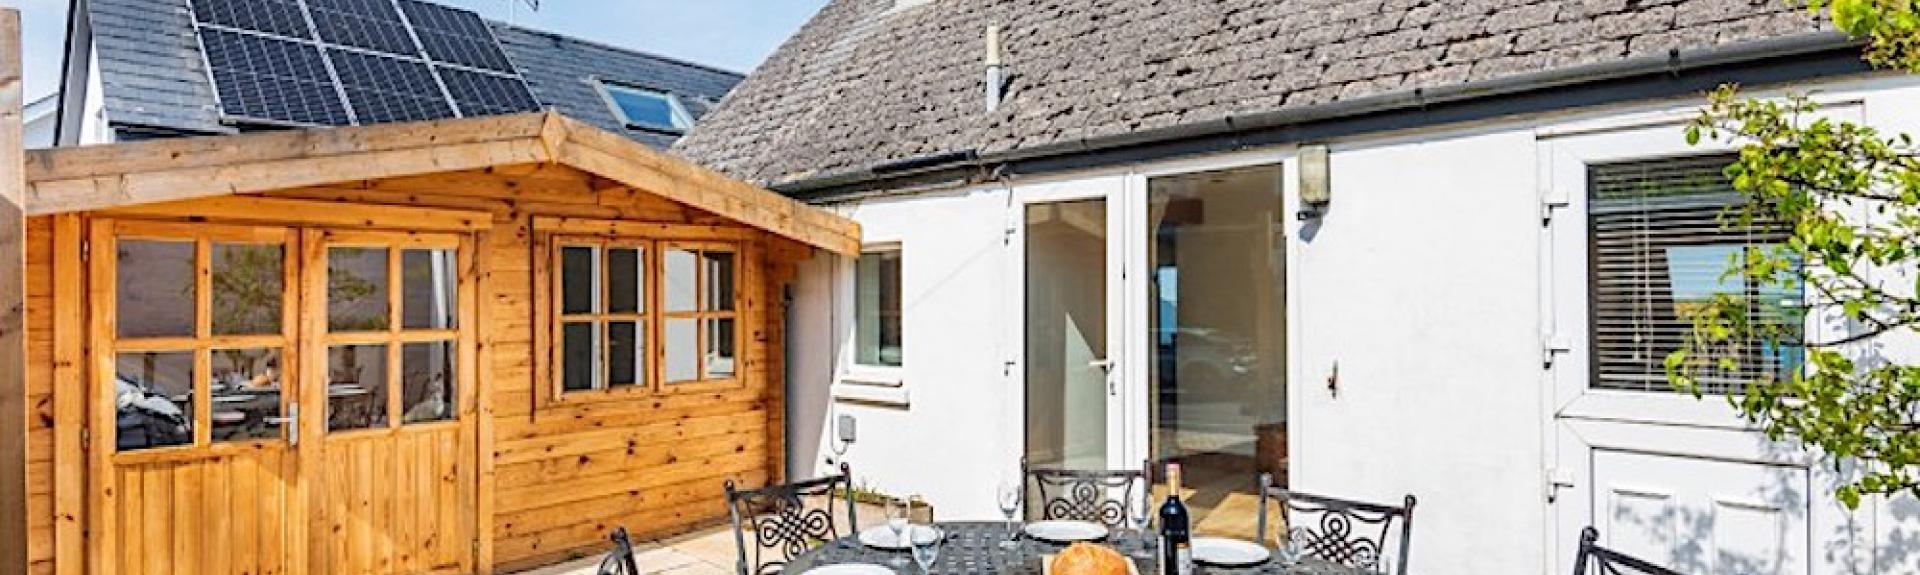 A single-storey holiday cottage overlooks a courtyard with a table laid for a meal